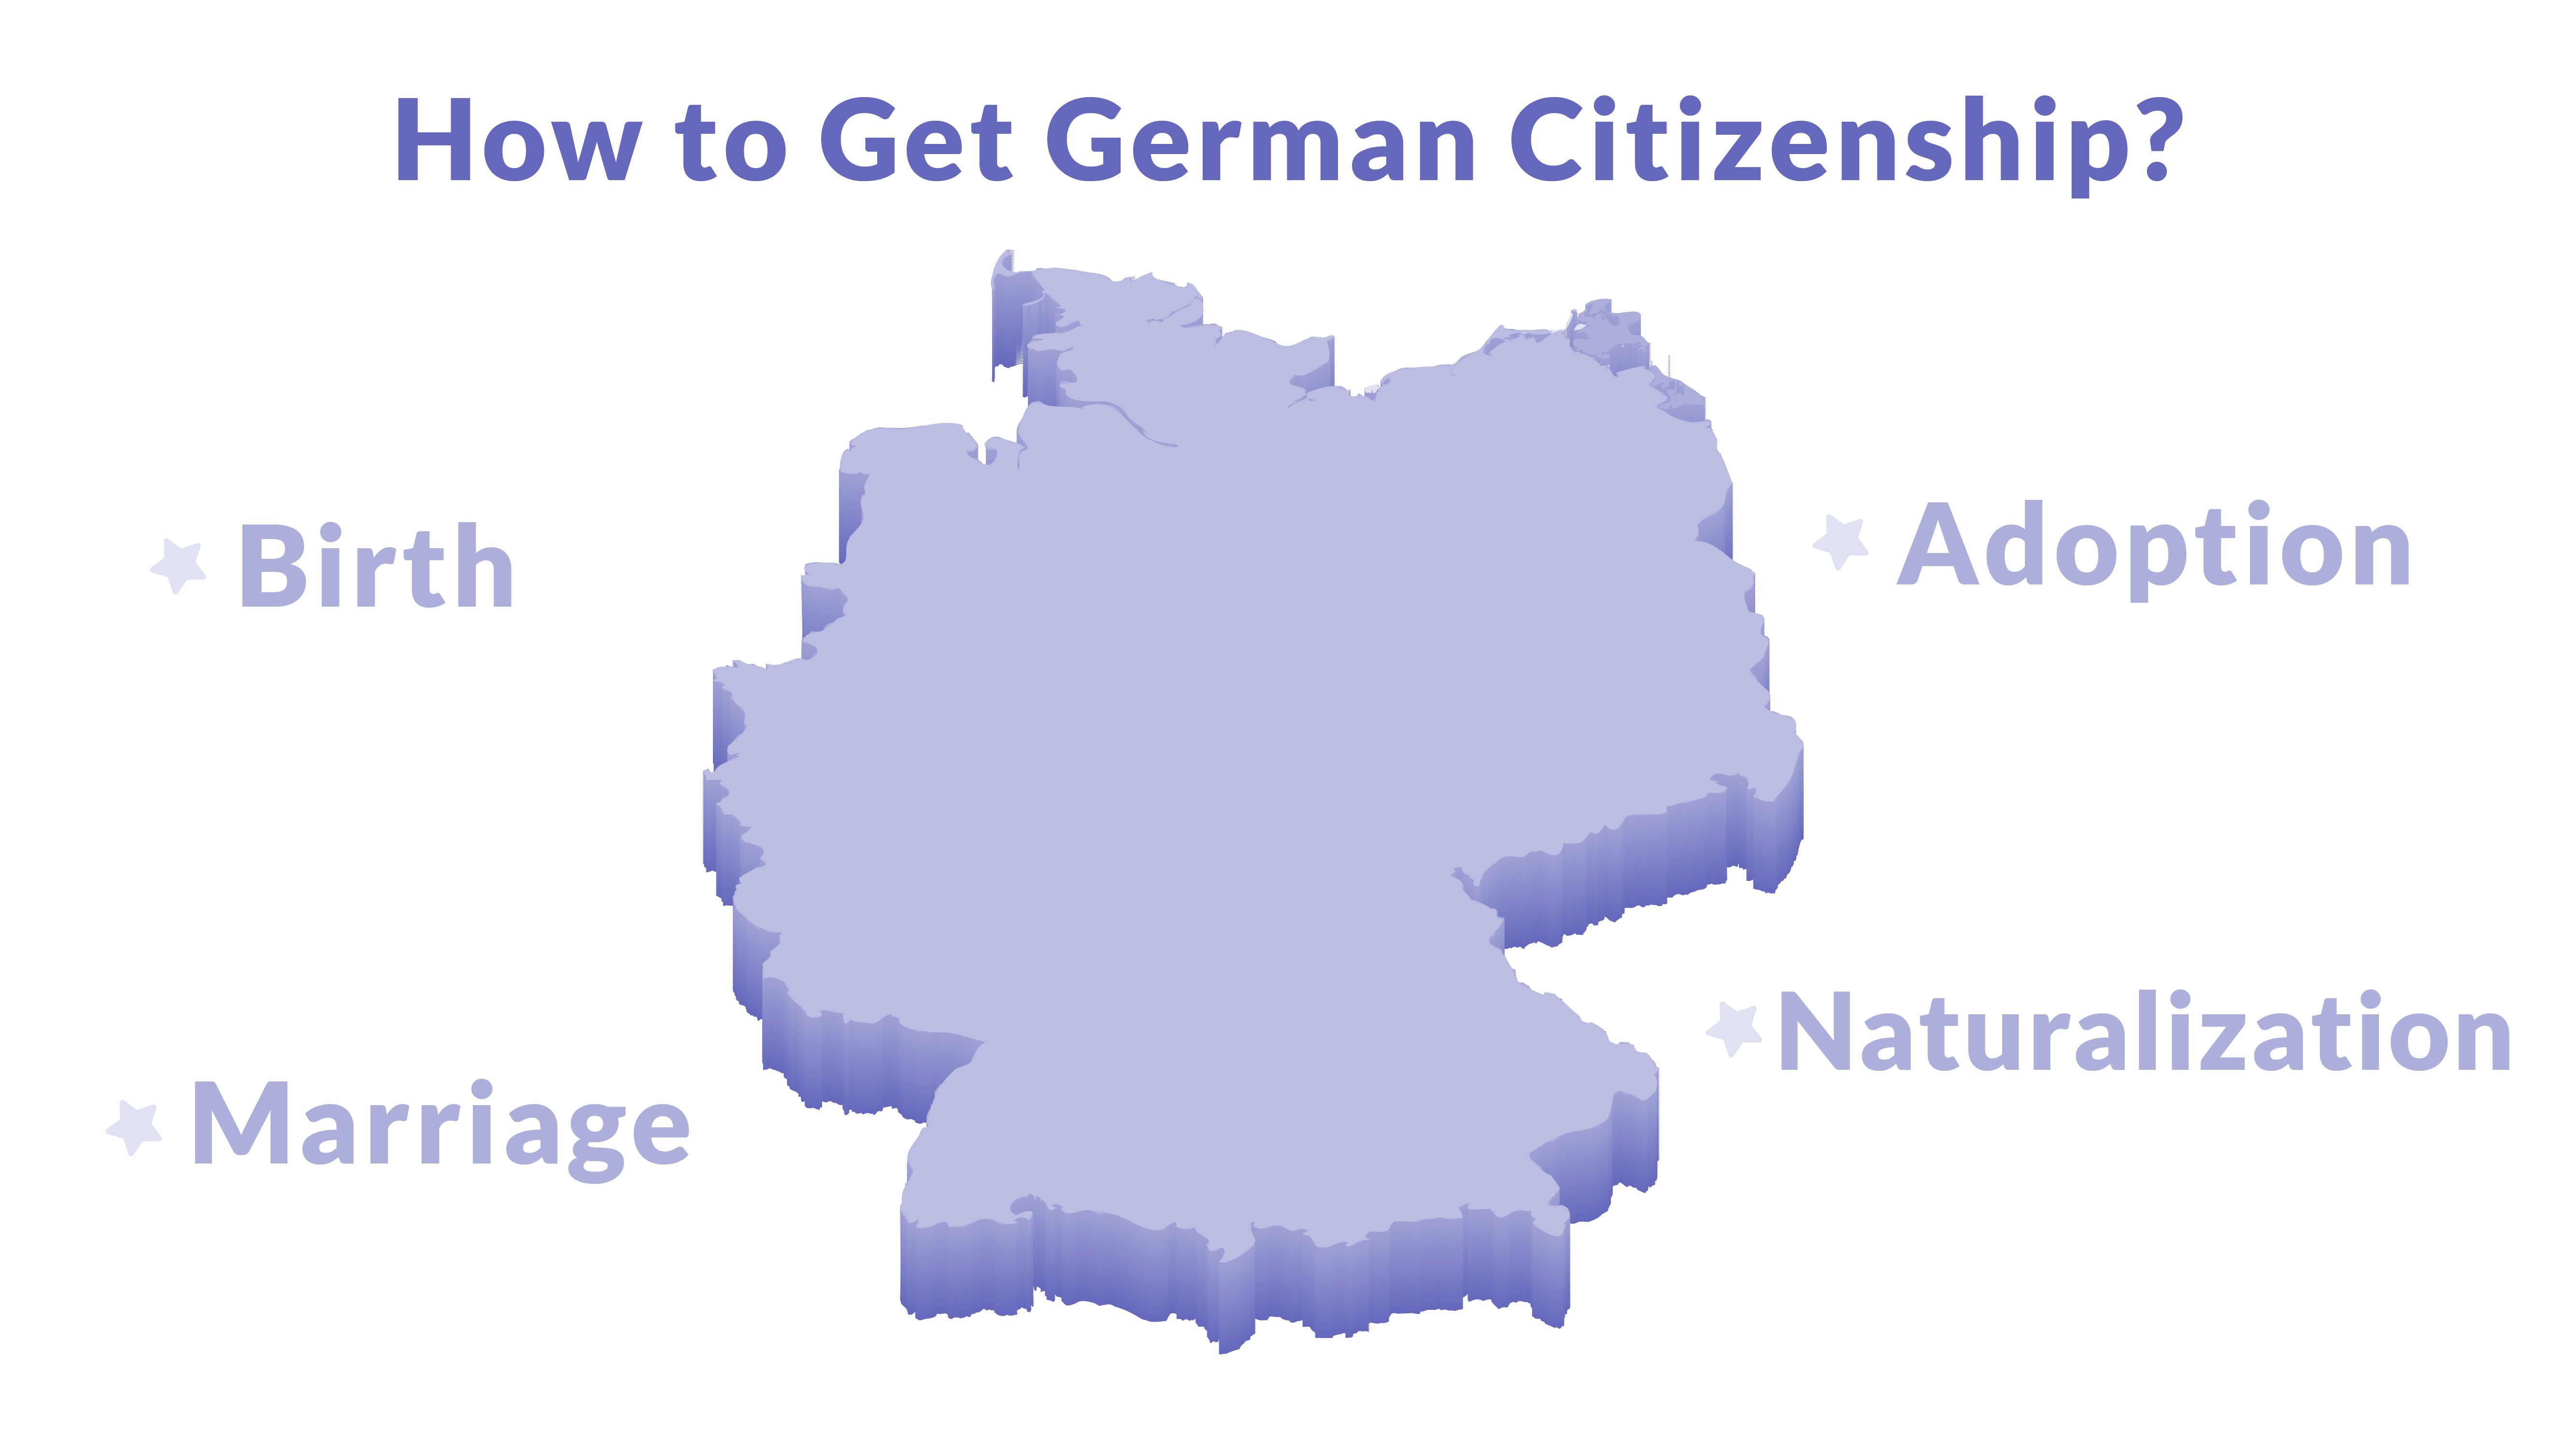 A chart of various ways to get German citizenship by: birth, marriage, naturalization, or adoption.